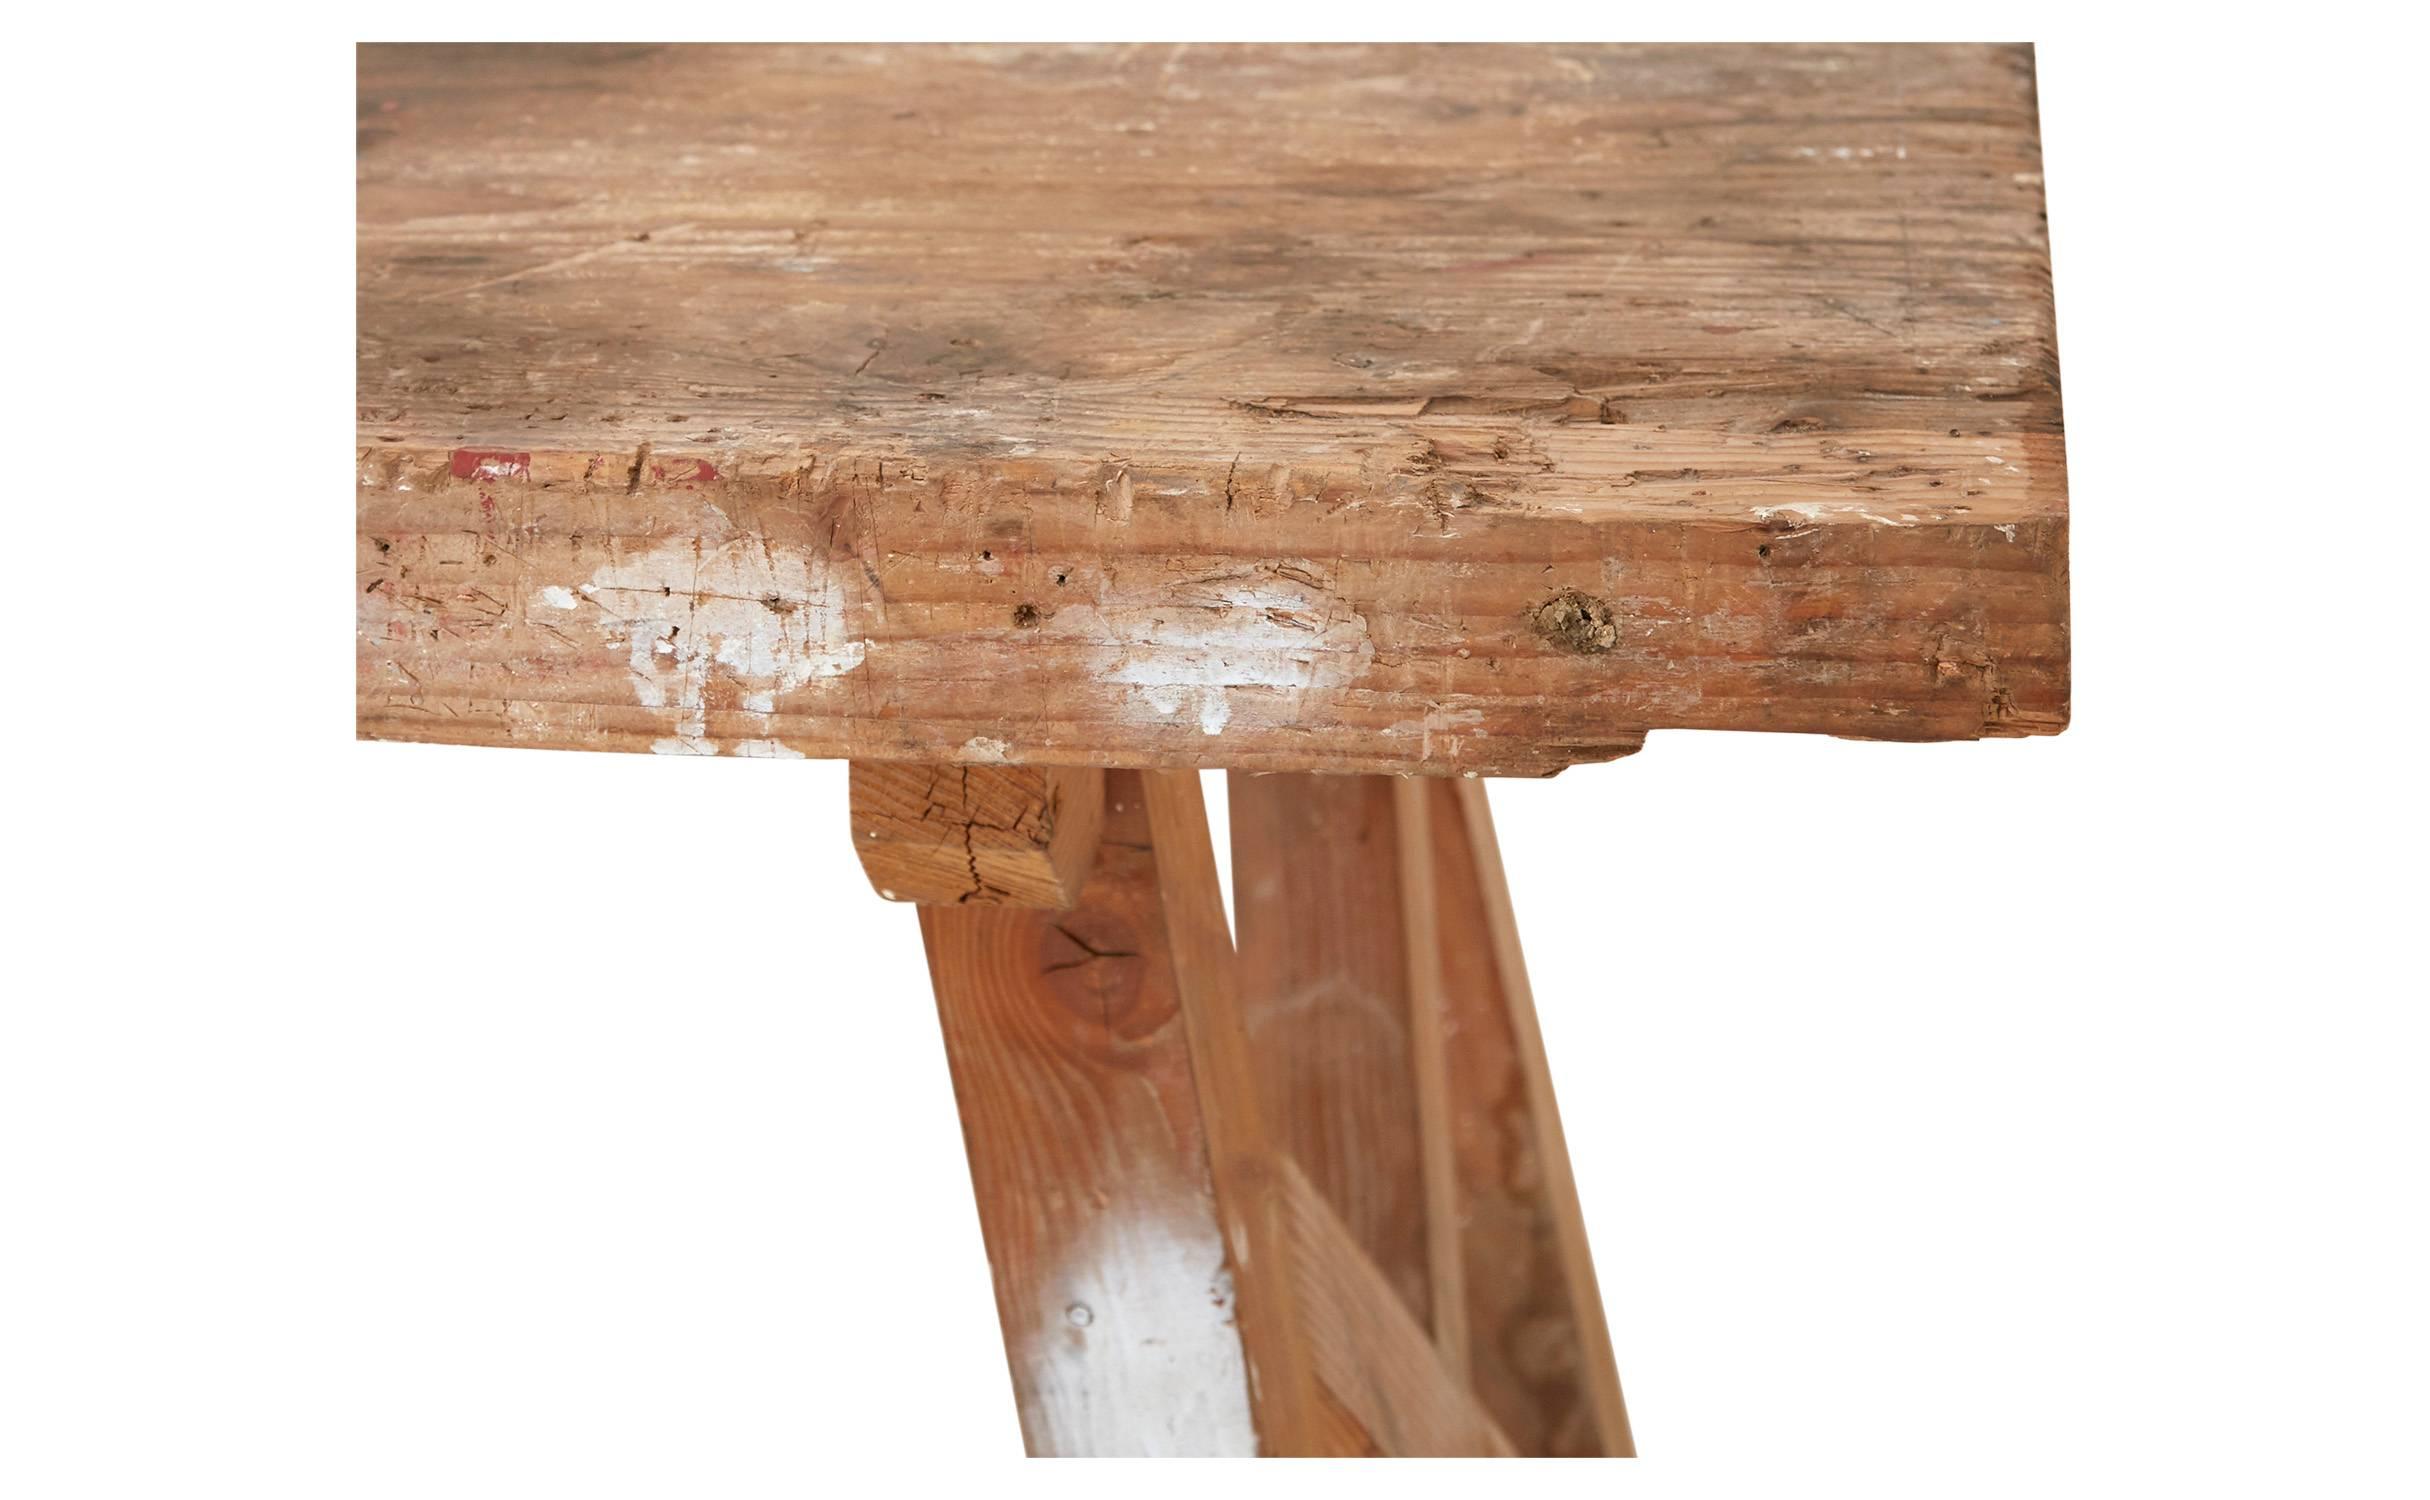 Crafted from wood in the 20th century, our weathered Vintage Carpenter Console was salvaged from a workshop in France. Naturally distressed after years of use, this sturdy worktable has taken on a nice patina over the years, with natural scratches,